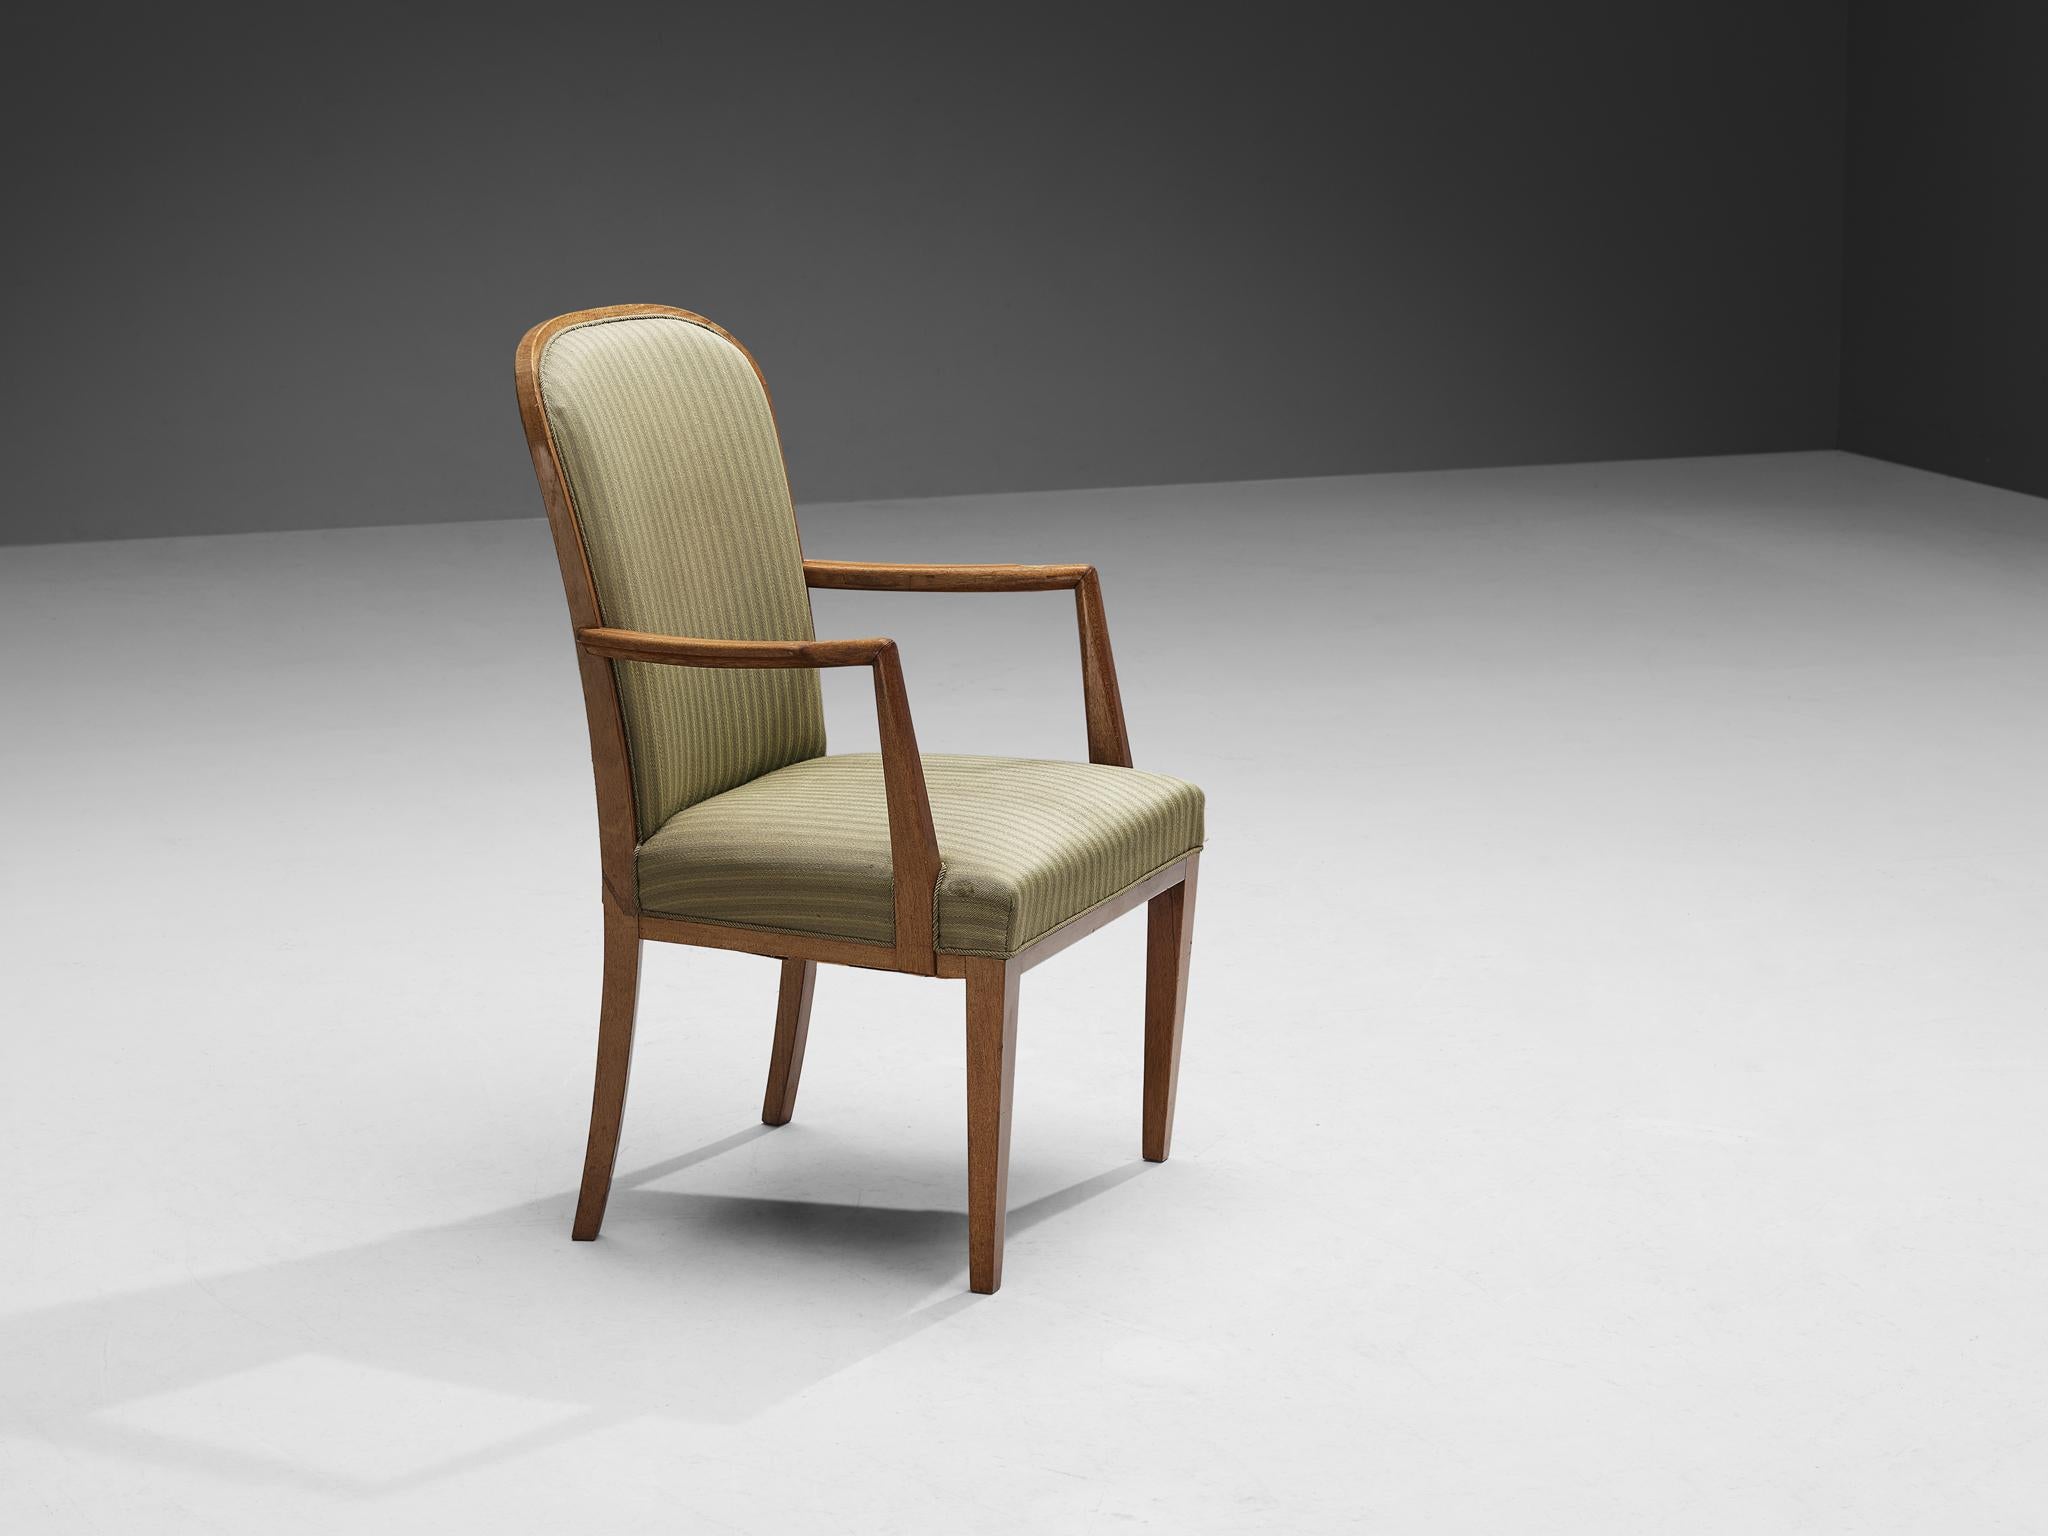 High back chair, oak, fabric, Scandinavia, 1950s.

This high back chair strongly resembles the design vocabulary by the Swedish designer Carl Malmsten. The unique lines and curves of the design are striking and the tapered wooden legs complement its